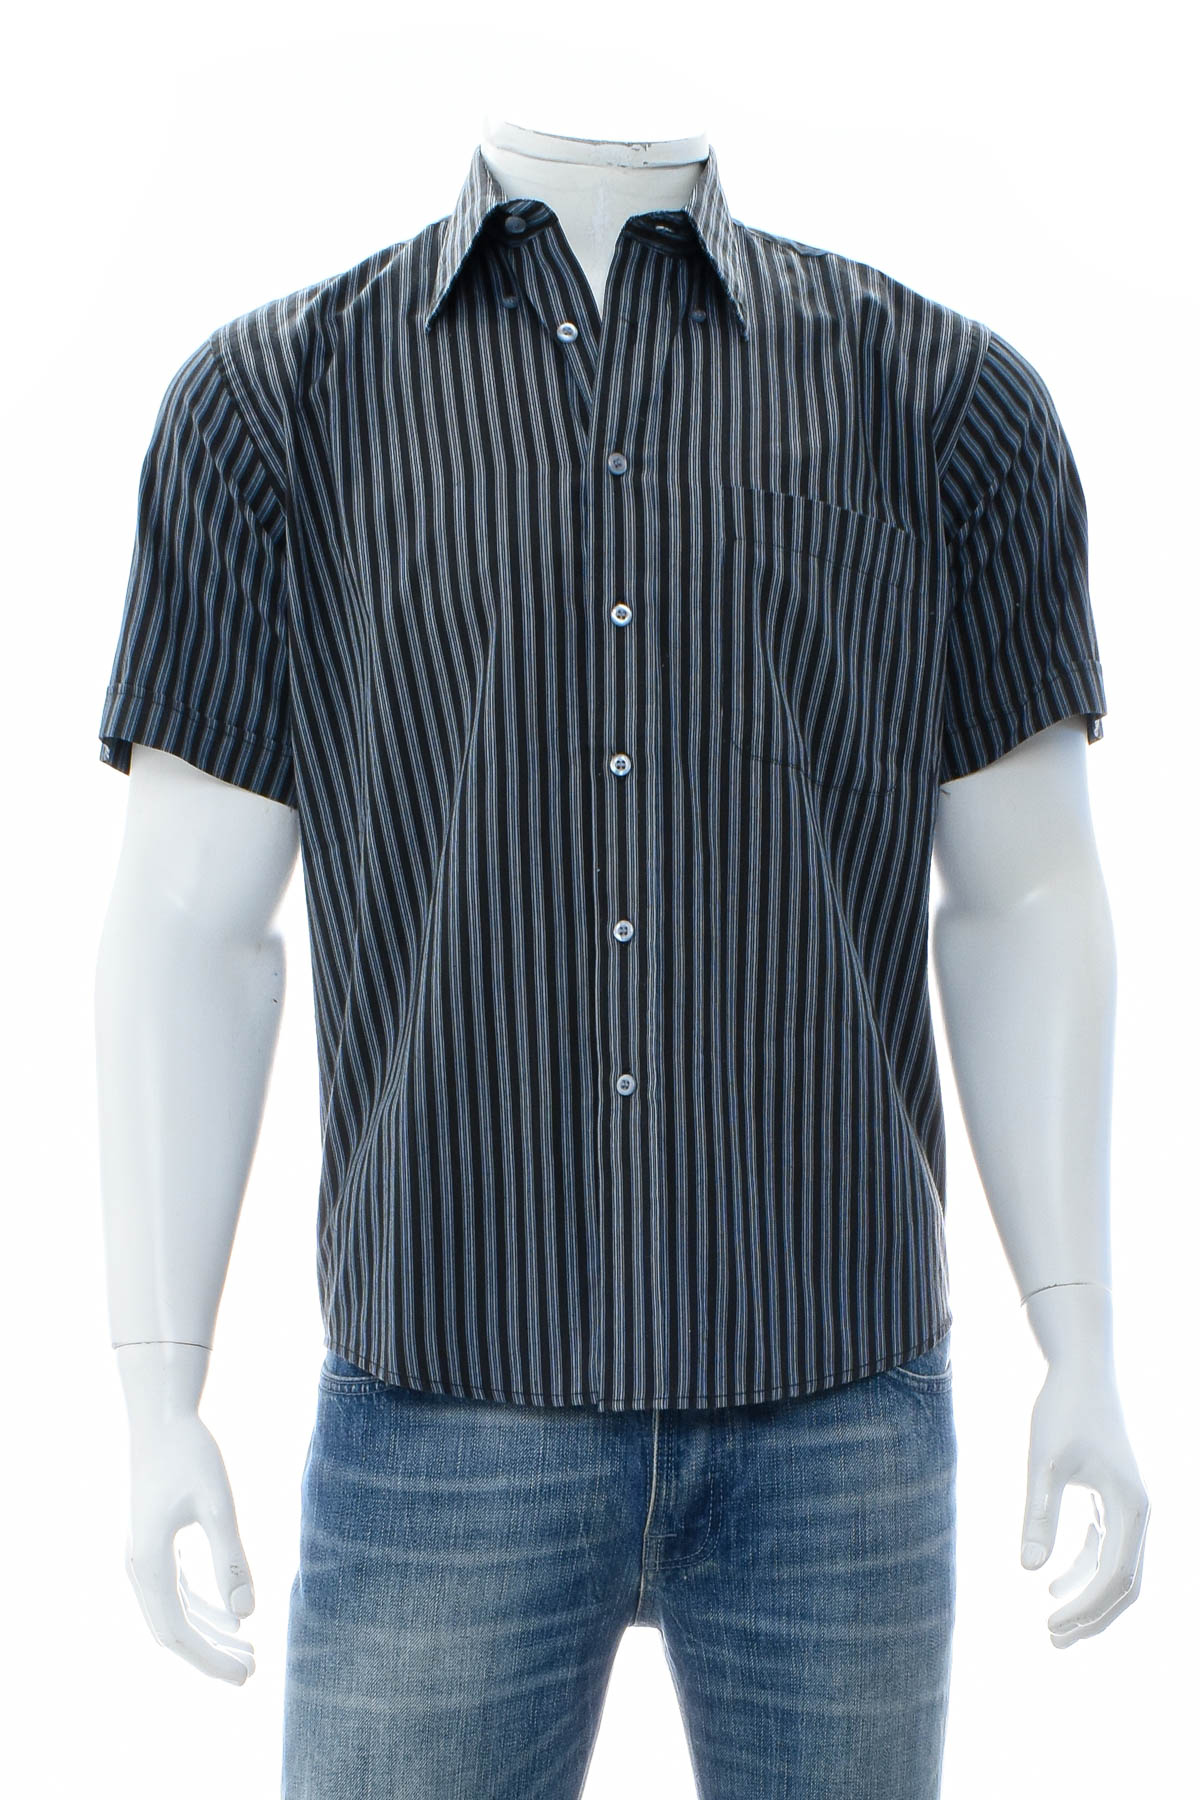 Men's shirt - Fashion Collection Y7 - 0